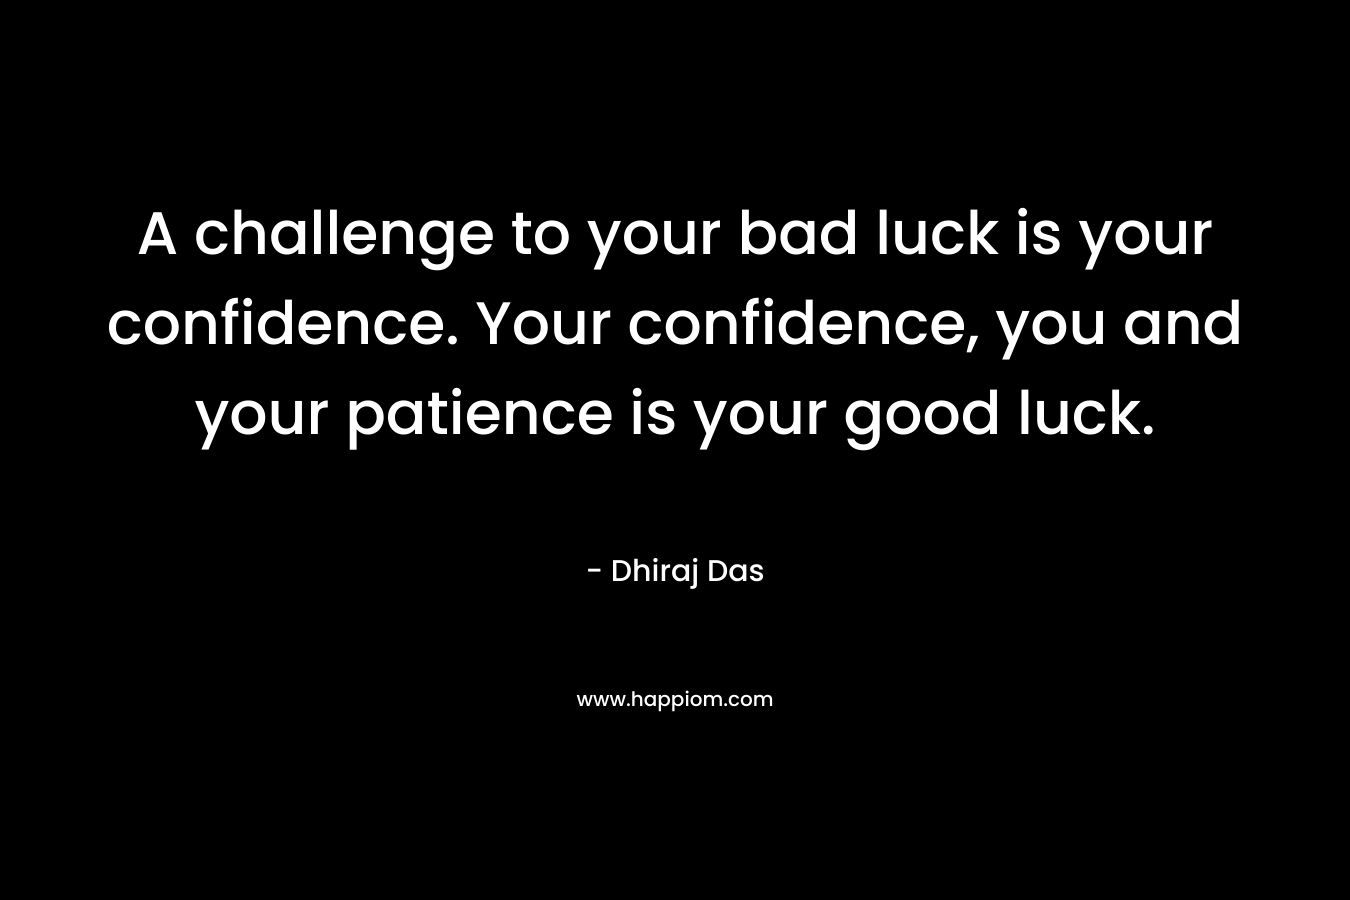 A challenge to your bad luck is your confidence. Your confidence, you and your patience is your good luck.